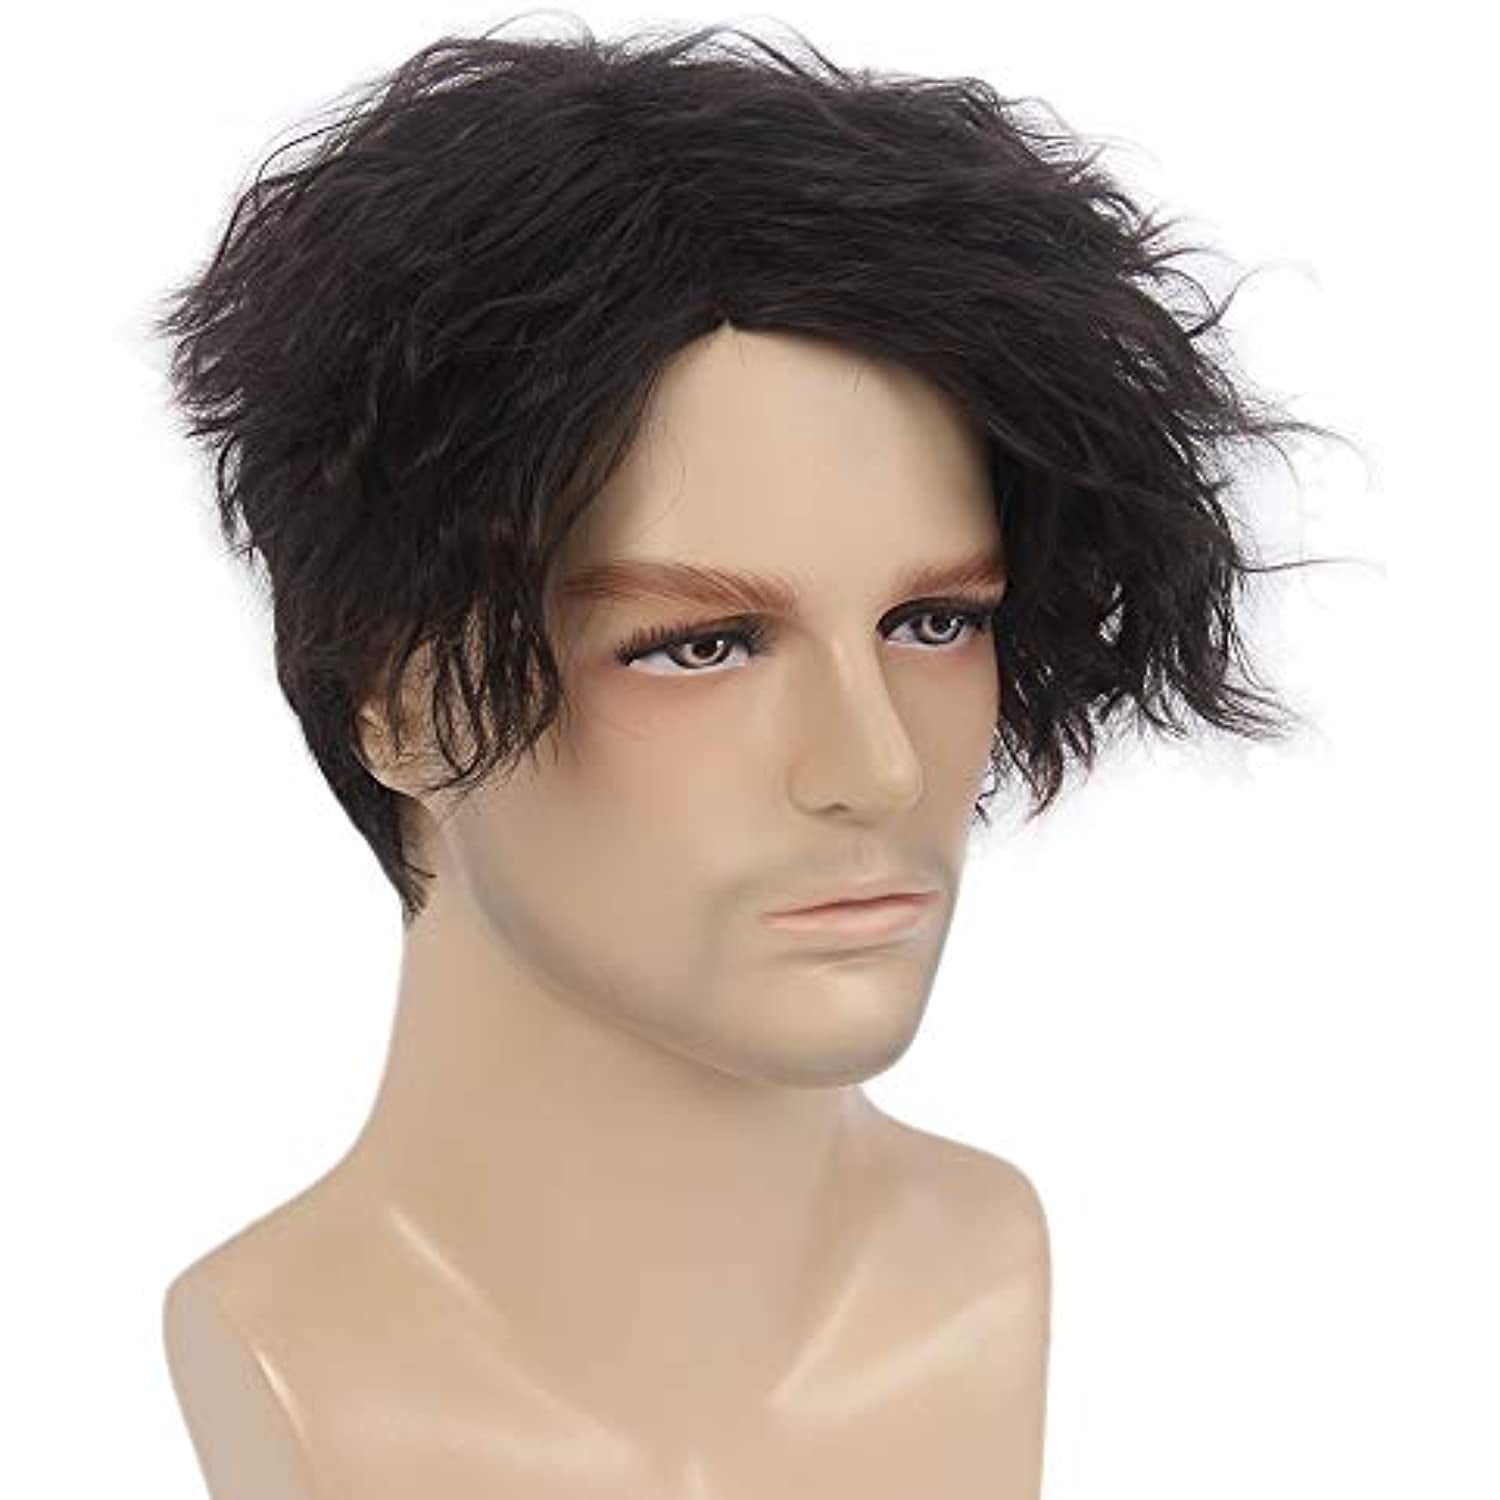 #10 H&Bwig Men Wigs Short Brown Wig Male Guy Layered Middle Part Hair Daily Costume Cosplay Anime Party 